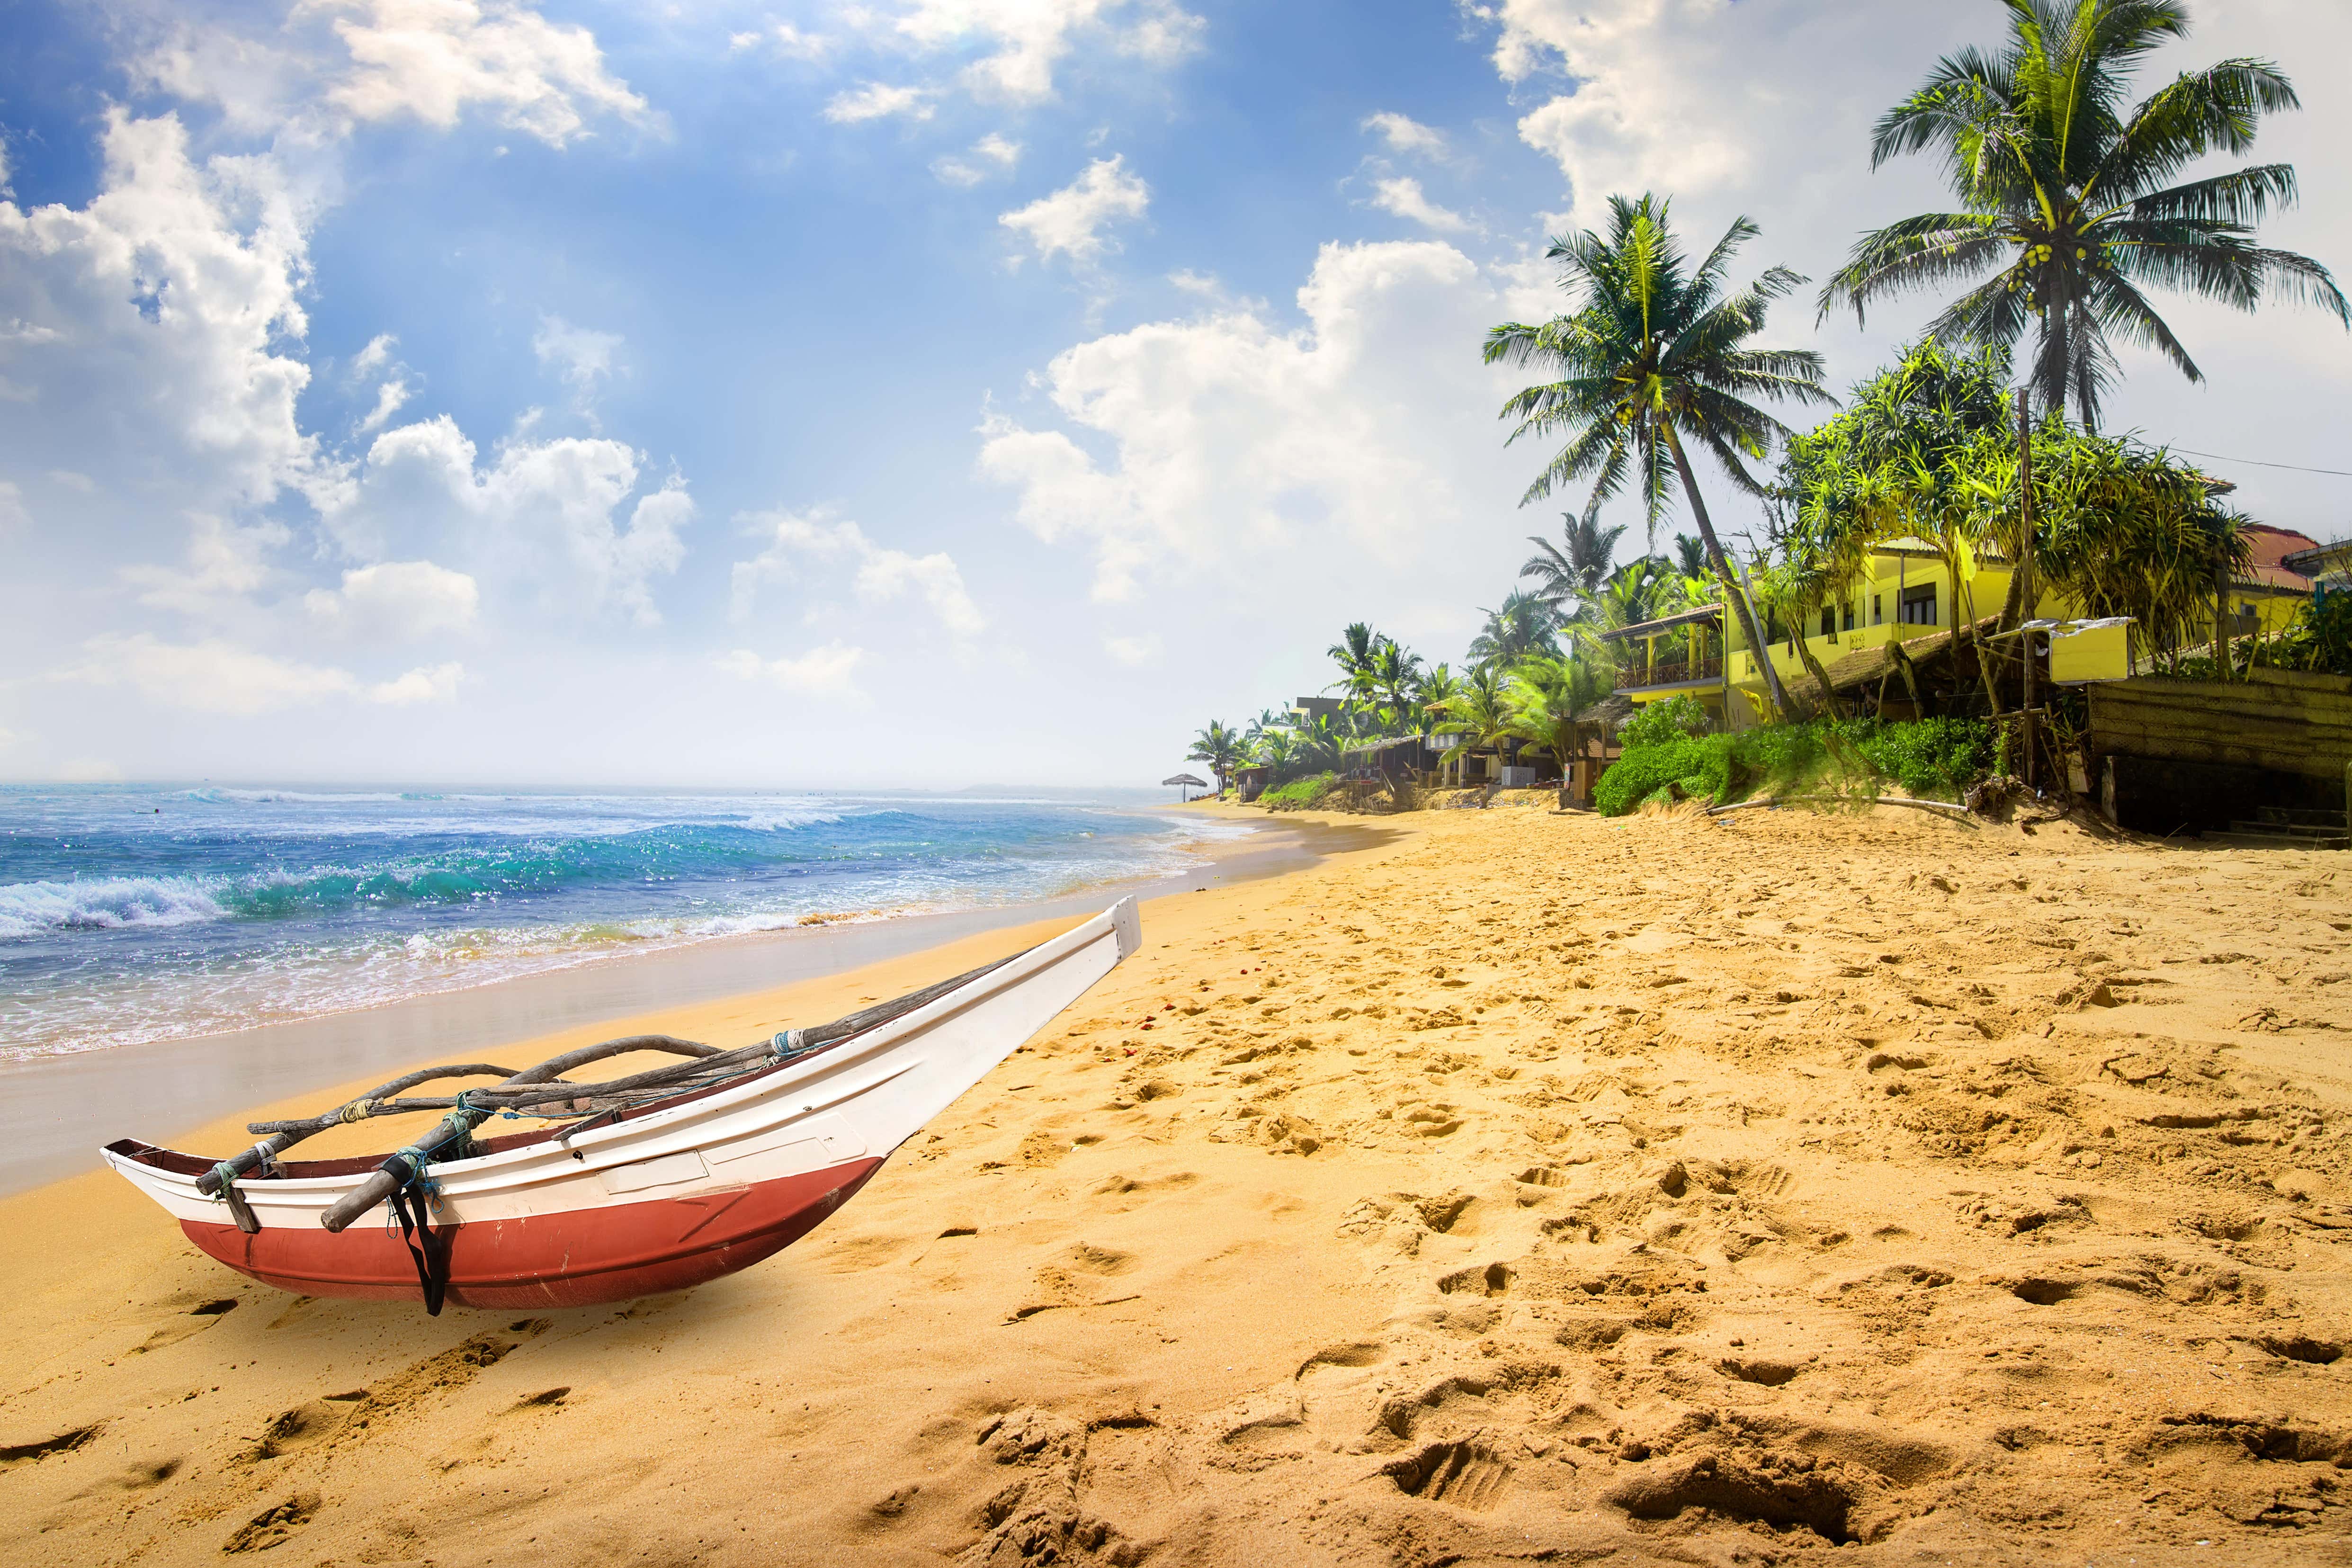 Glorious beaches await in Sri Lanka – and much more besides